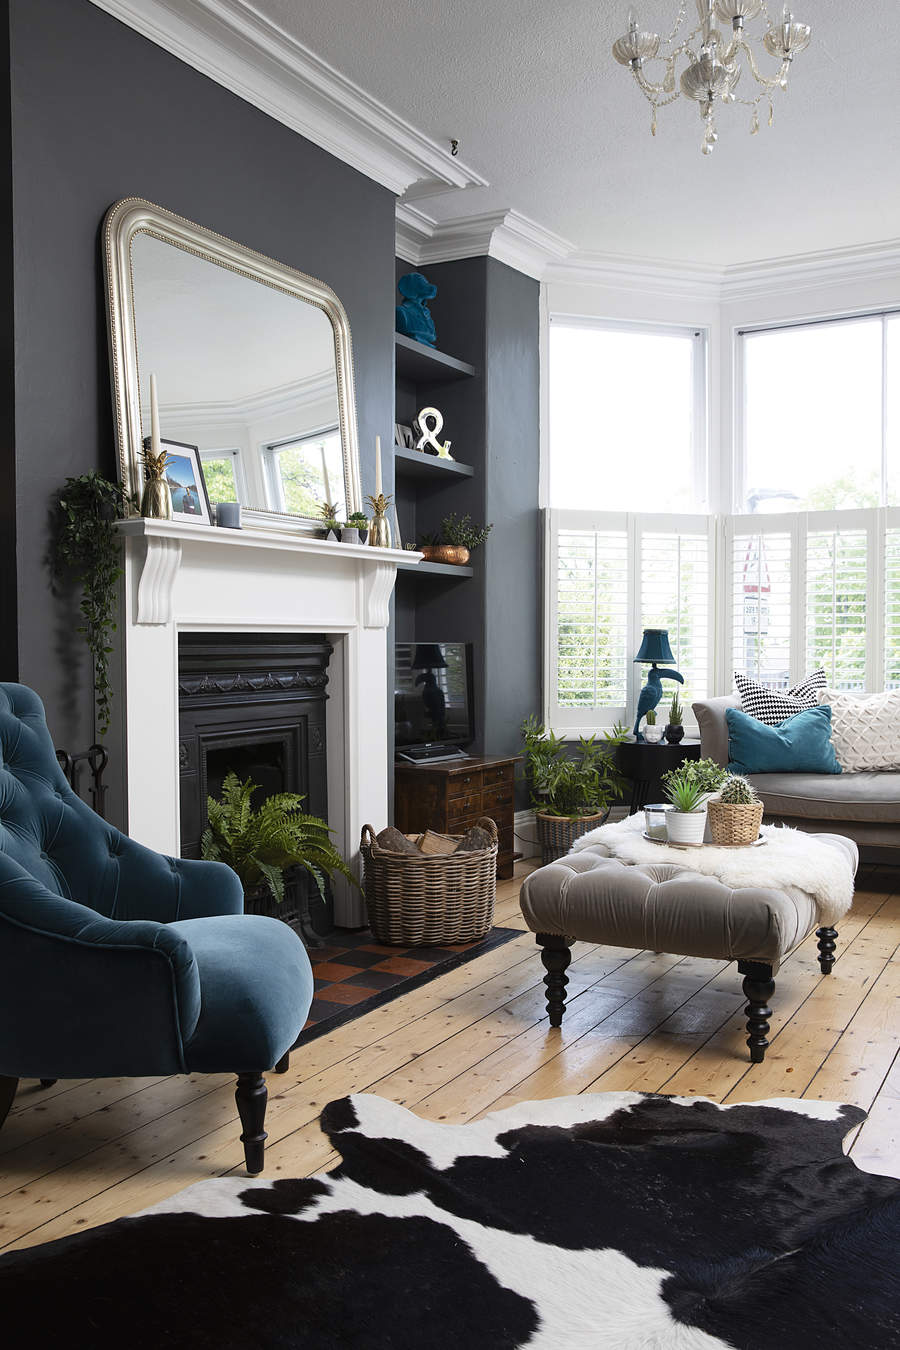 A dark grey living room with traditional black fireplace, white mantel, large framed mirror over mantel, alcove shelving, cow-print rug, blue velvet armchair